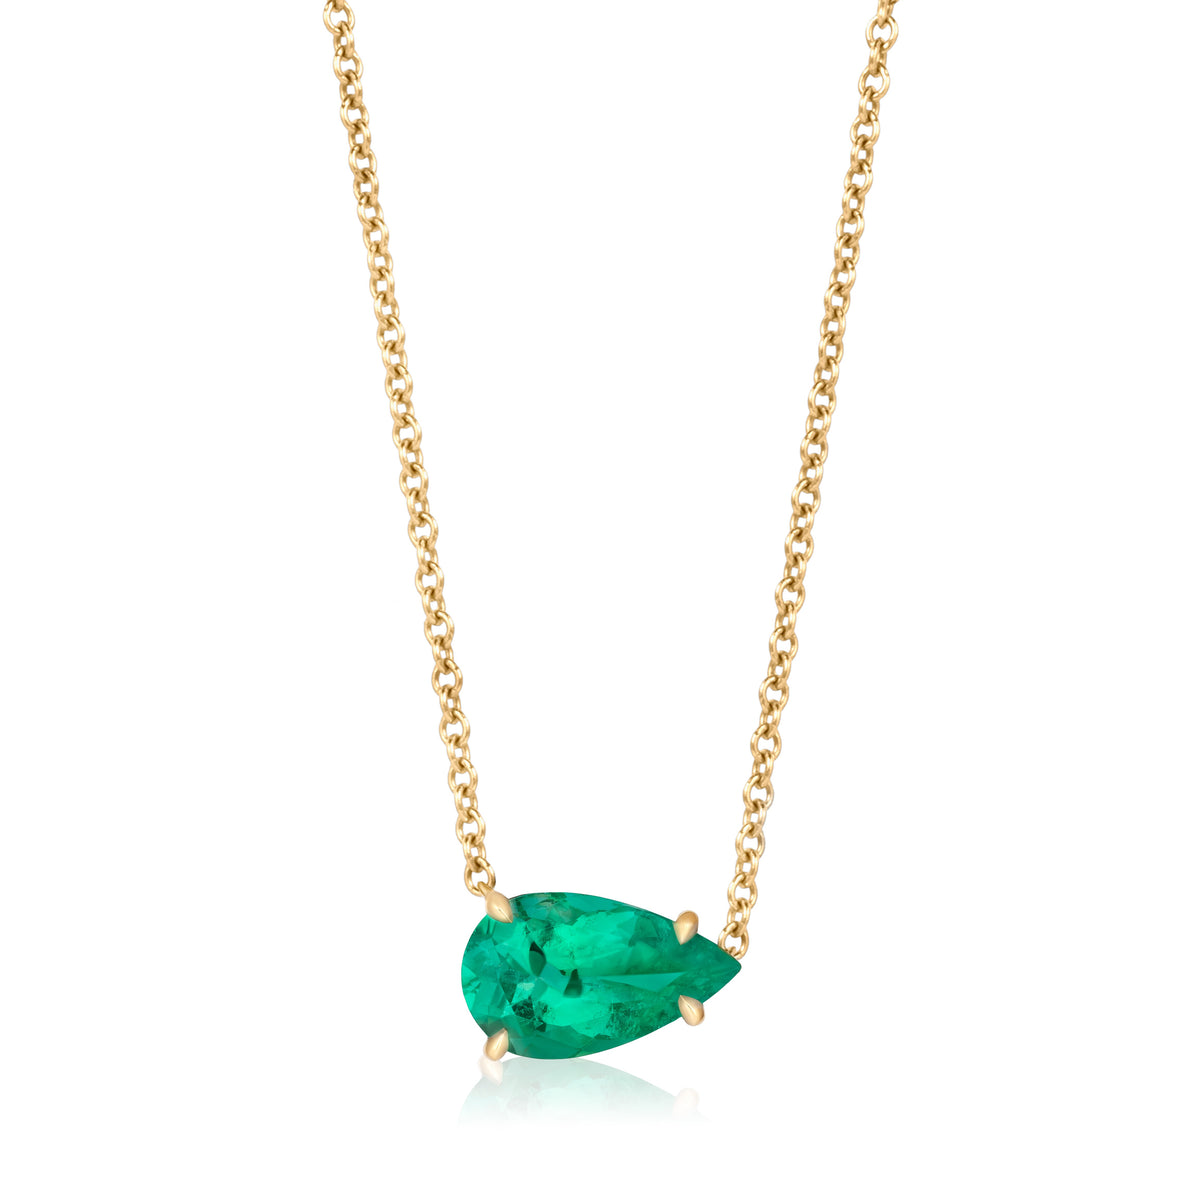 East-West Pear Shape Emerald Pendant in Yellow Gold